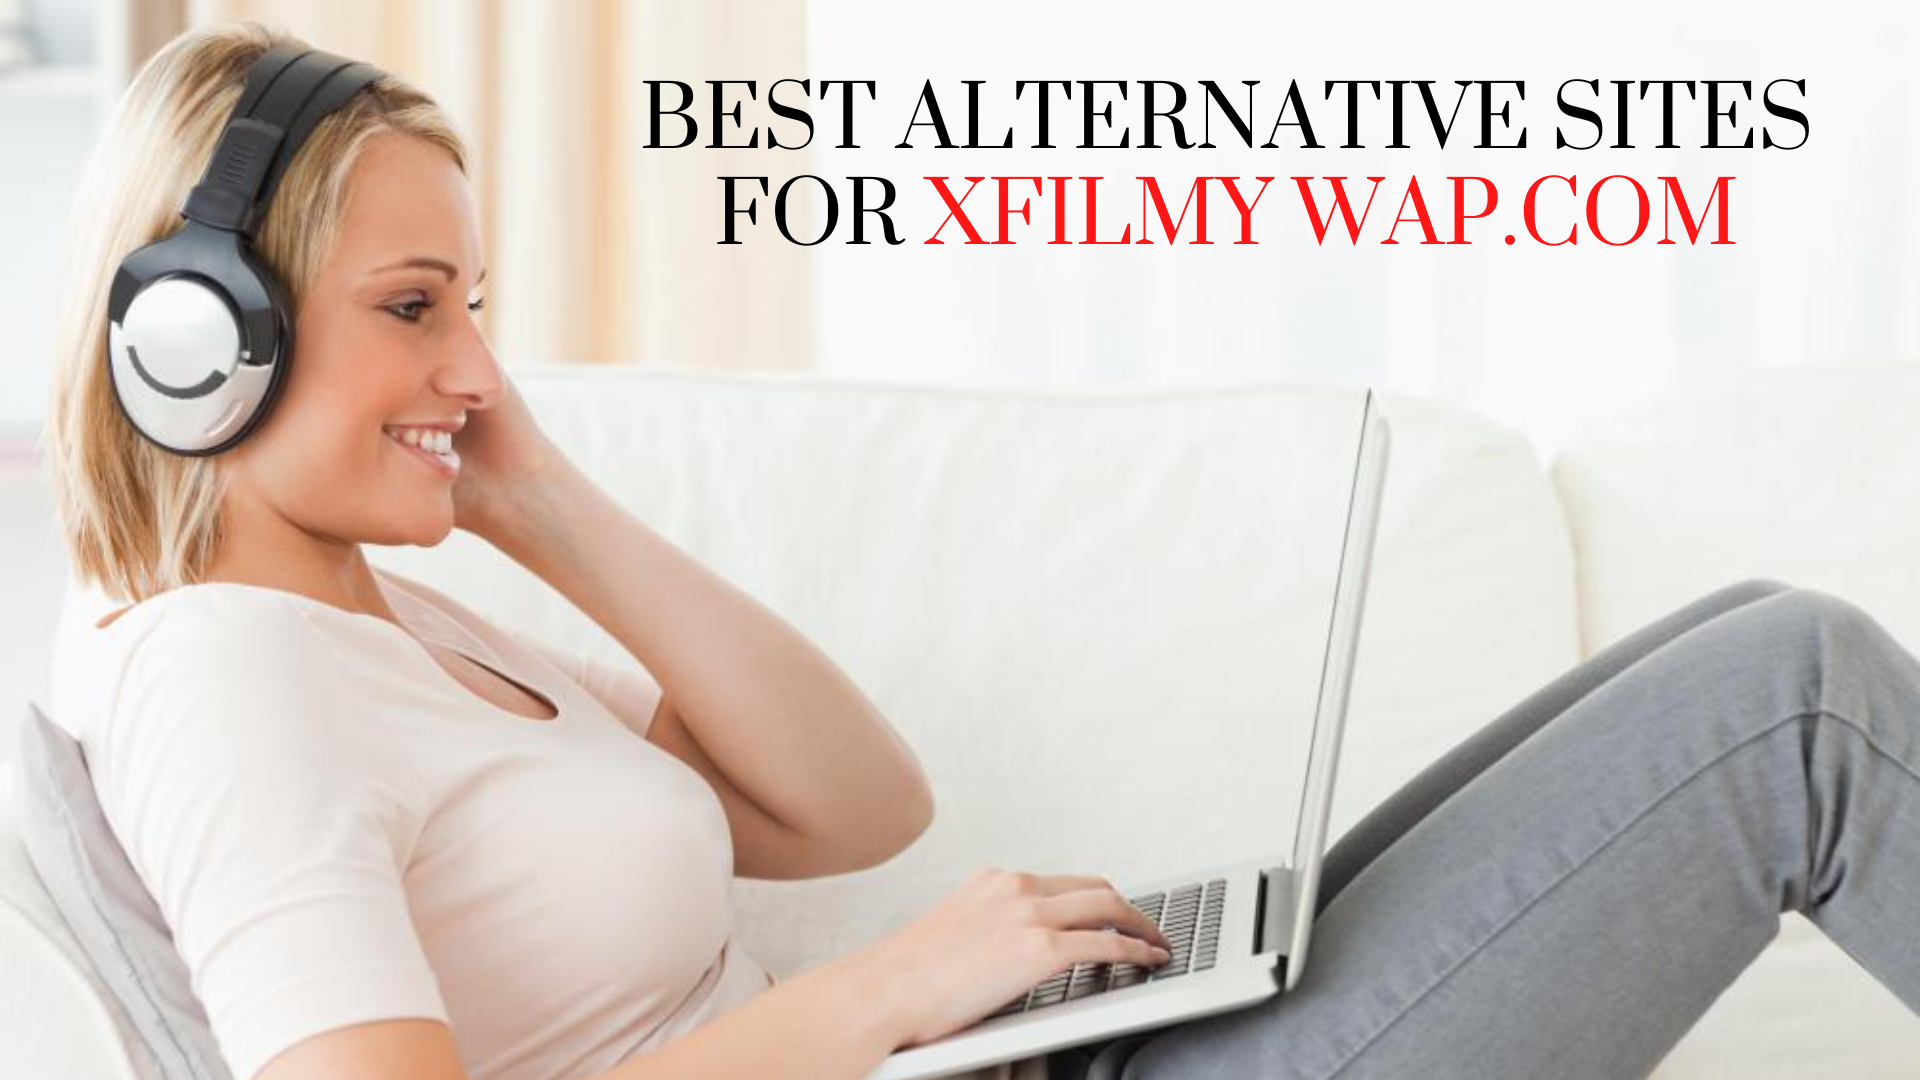 A woman sitting on a couch while watching from her laptop with words Best Alternative Sites For Xfilmy Wap.Com